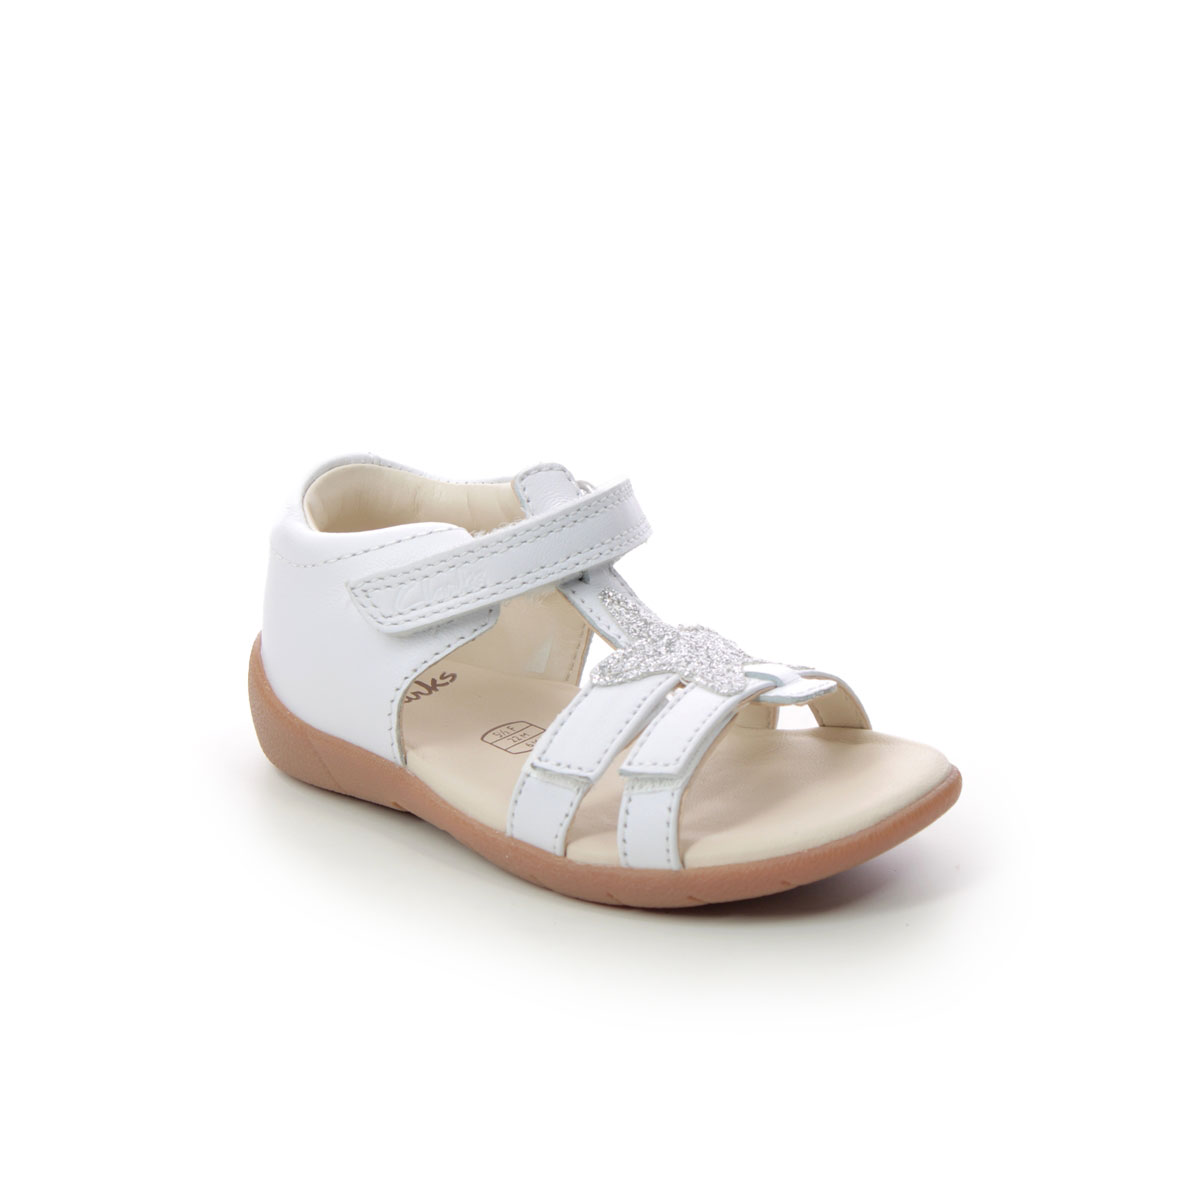 Clarks Zora Summer T White Leather Kids Sandals 566436F In Size 6 In Plain White Leather F Width Fitting Regular Fit For kids